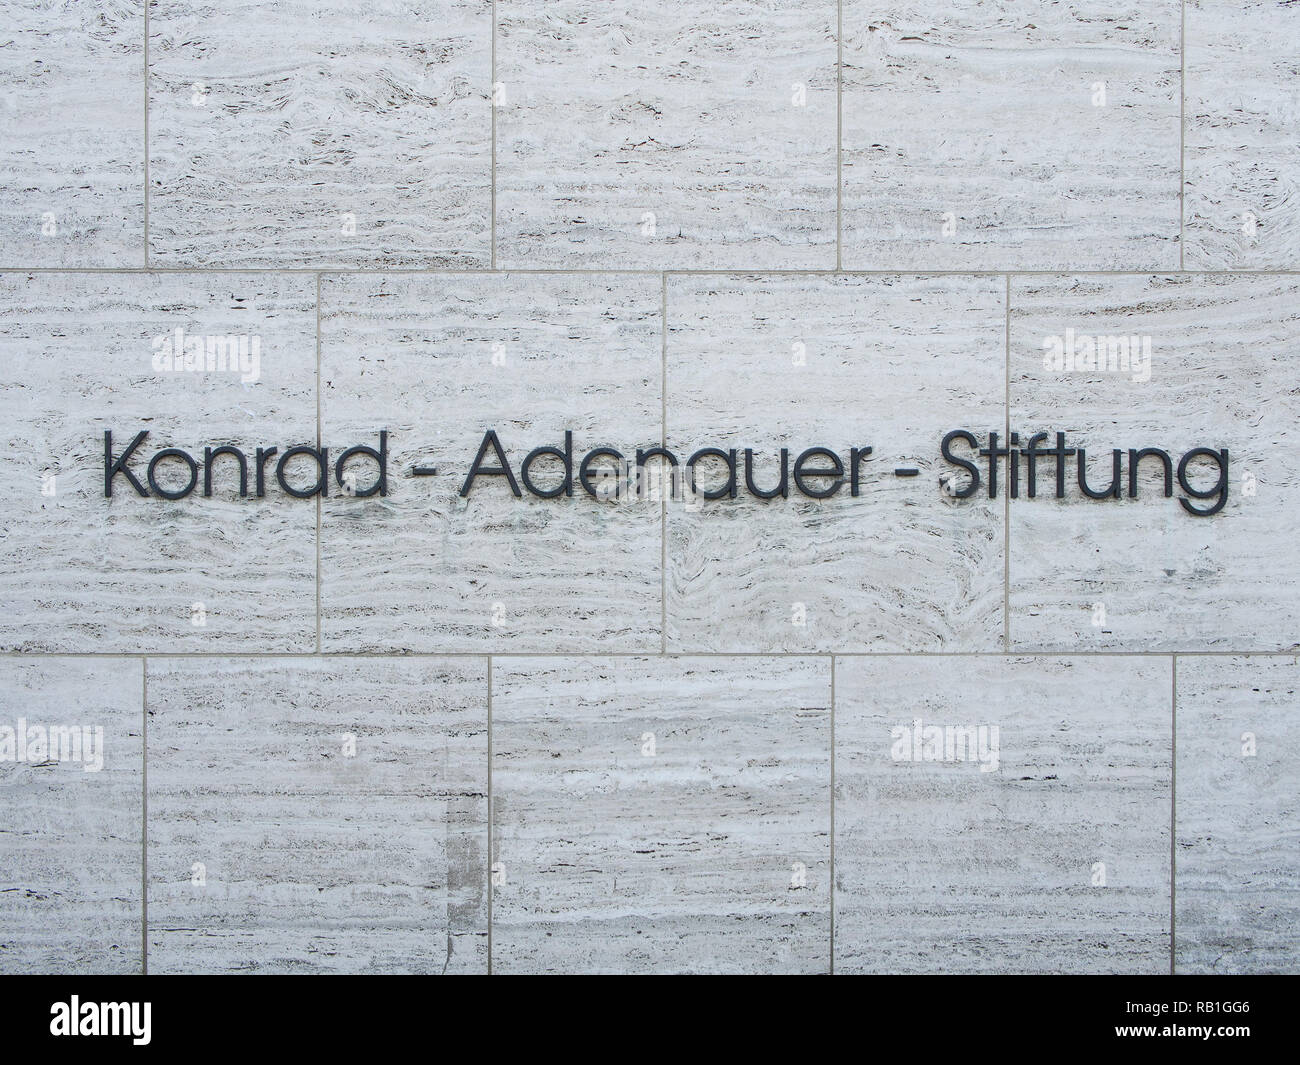 BERLIN, GERMANY - SEPTEMBER 6, 2016: Lettering Konrad-Adenauer-Stiftung, German political party foundation associated with the Christian Democratic Union (CDU) Stock Photo